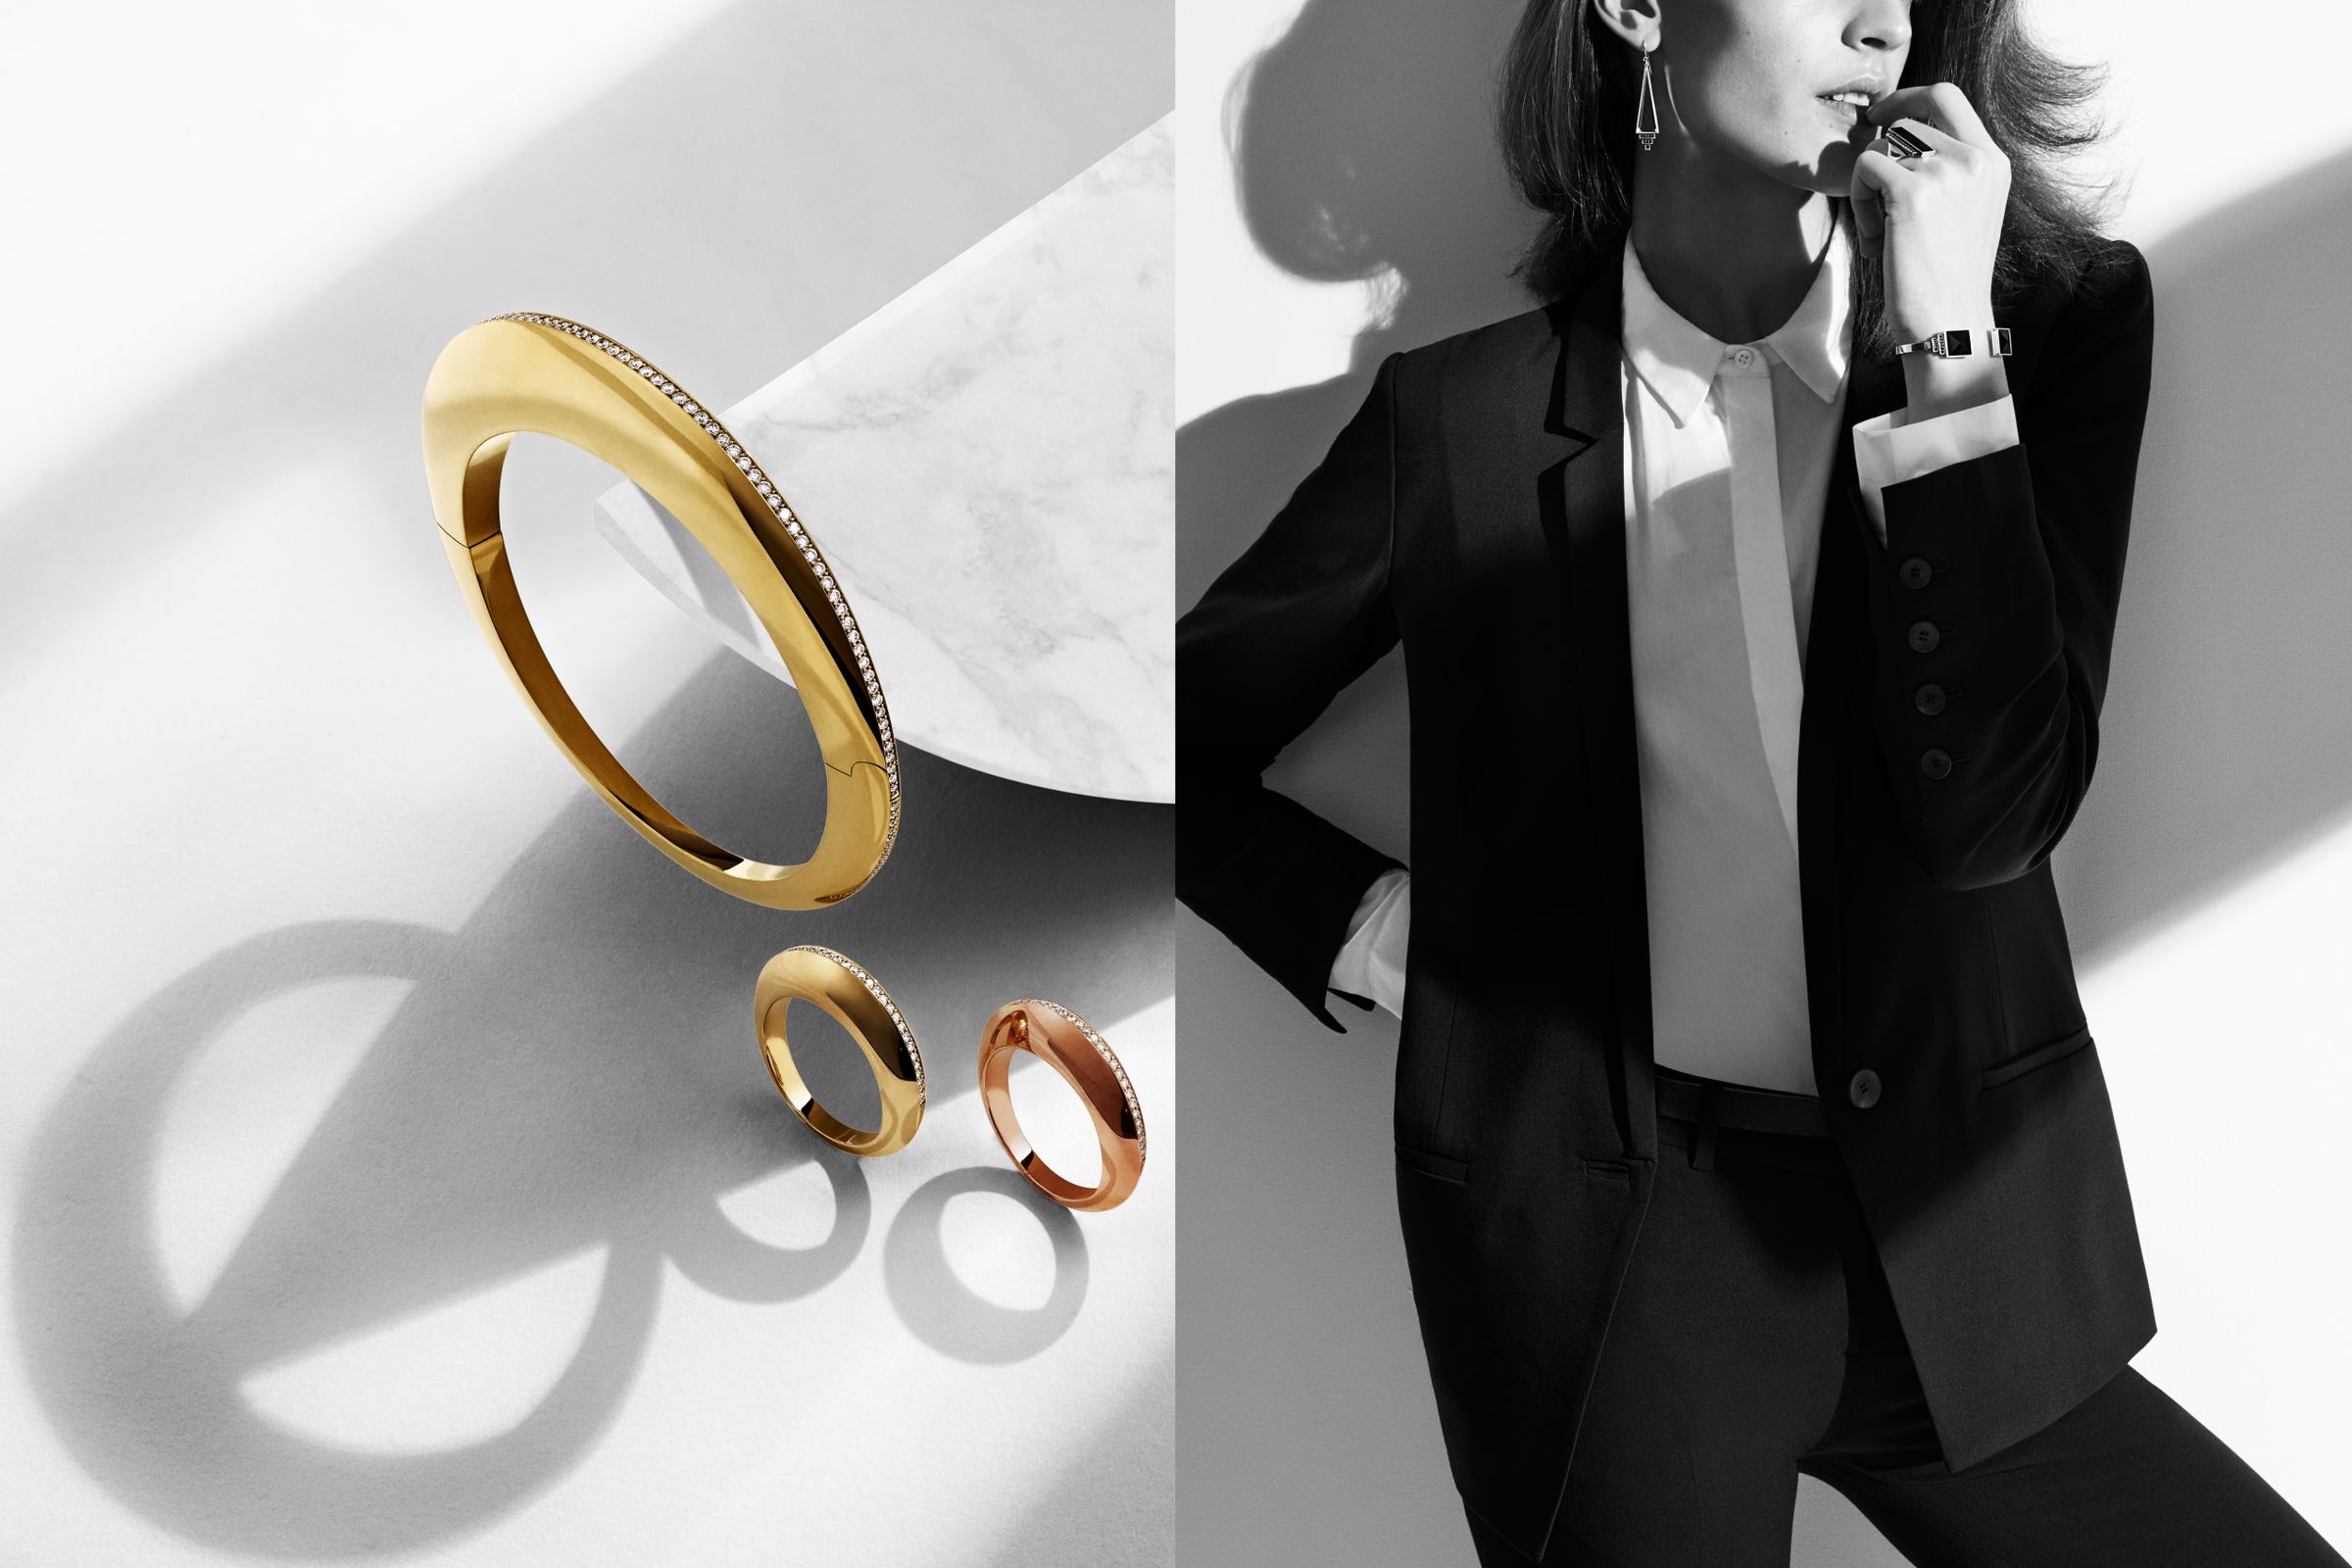 Georg Jensen campaign photographed by Hasse Nielsen and Toby McFarlan Pond